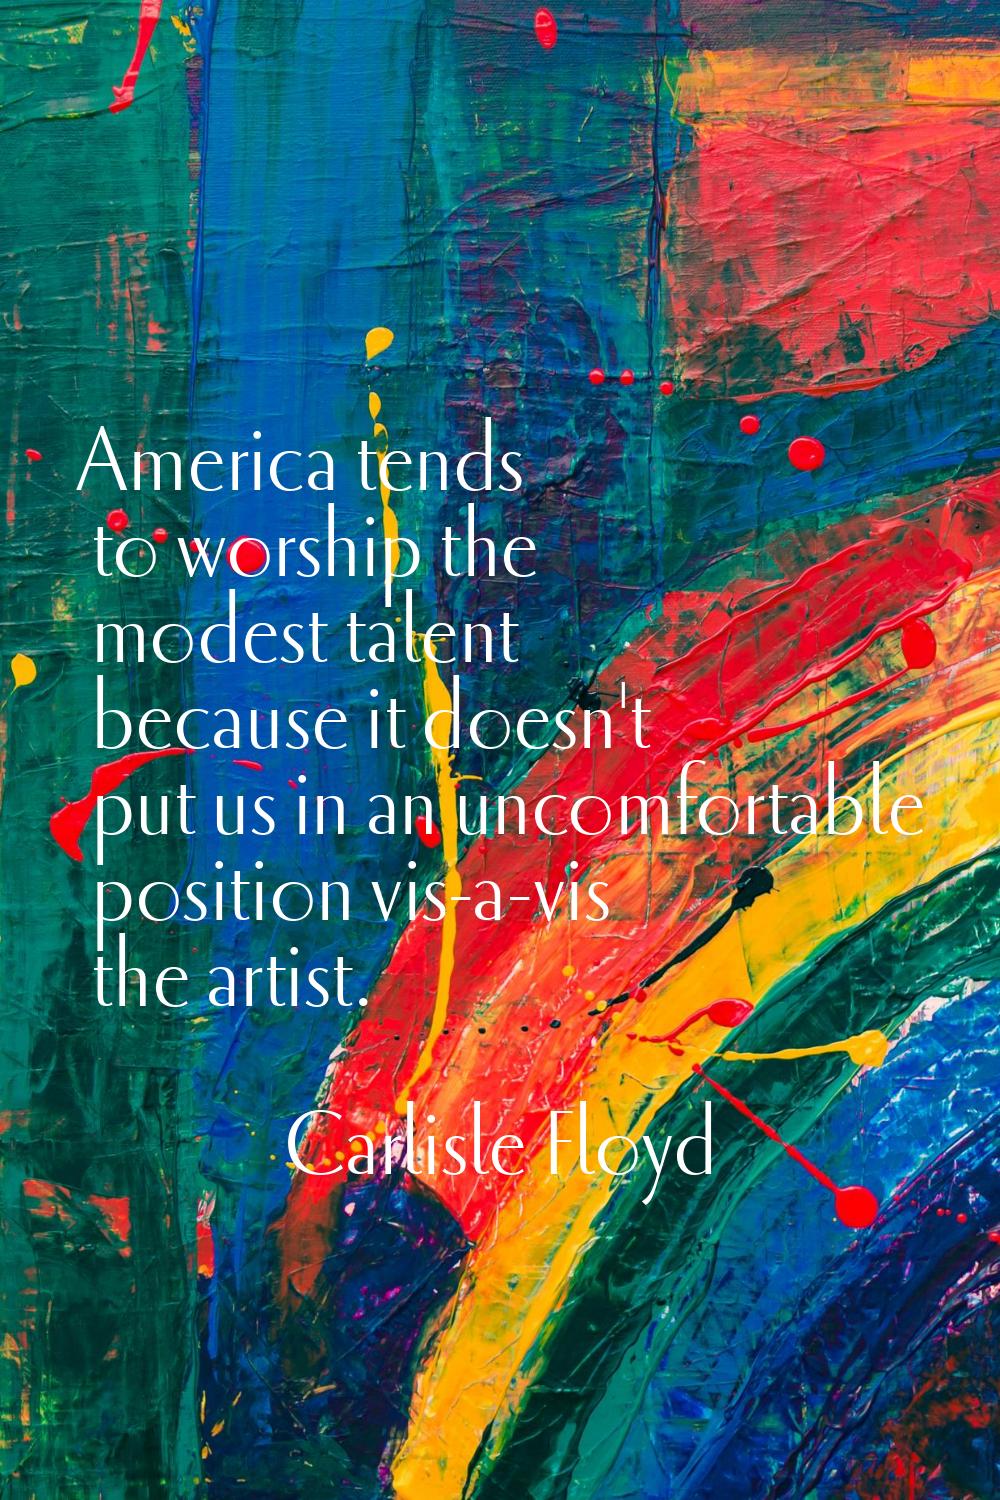 America tends to worship the modest talent because it doesn't put us in an uncomfortable position v